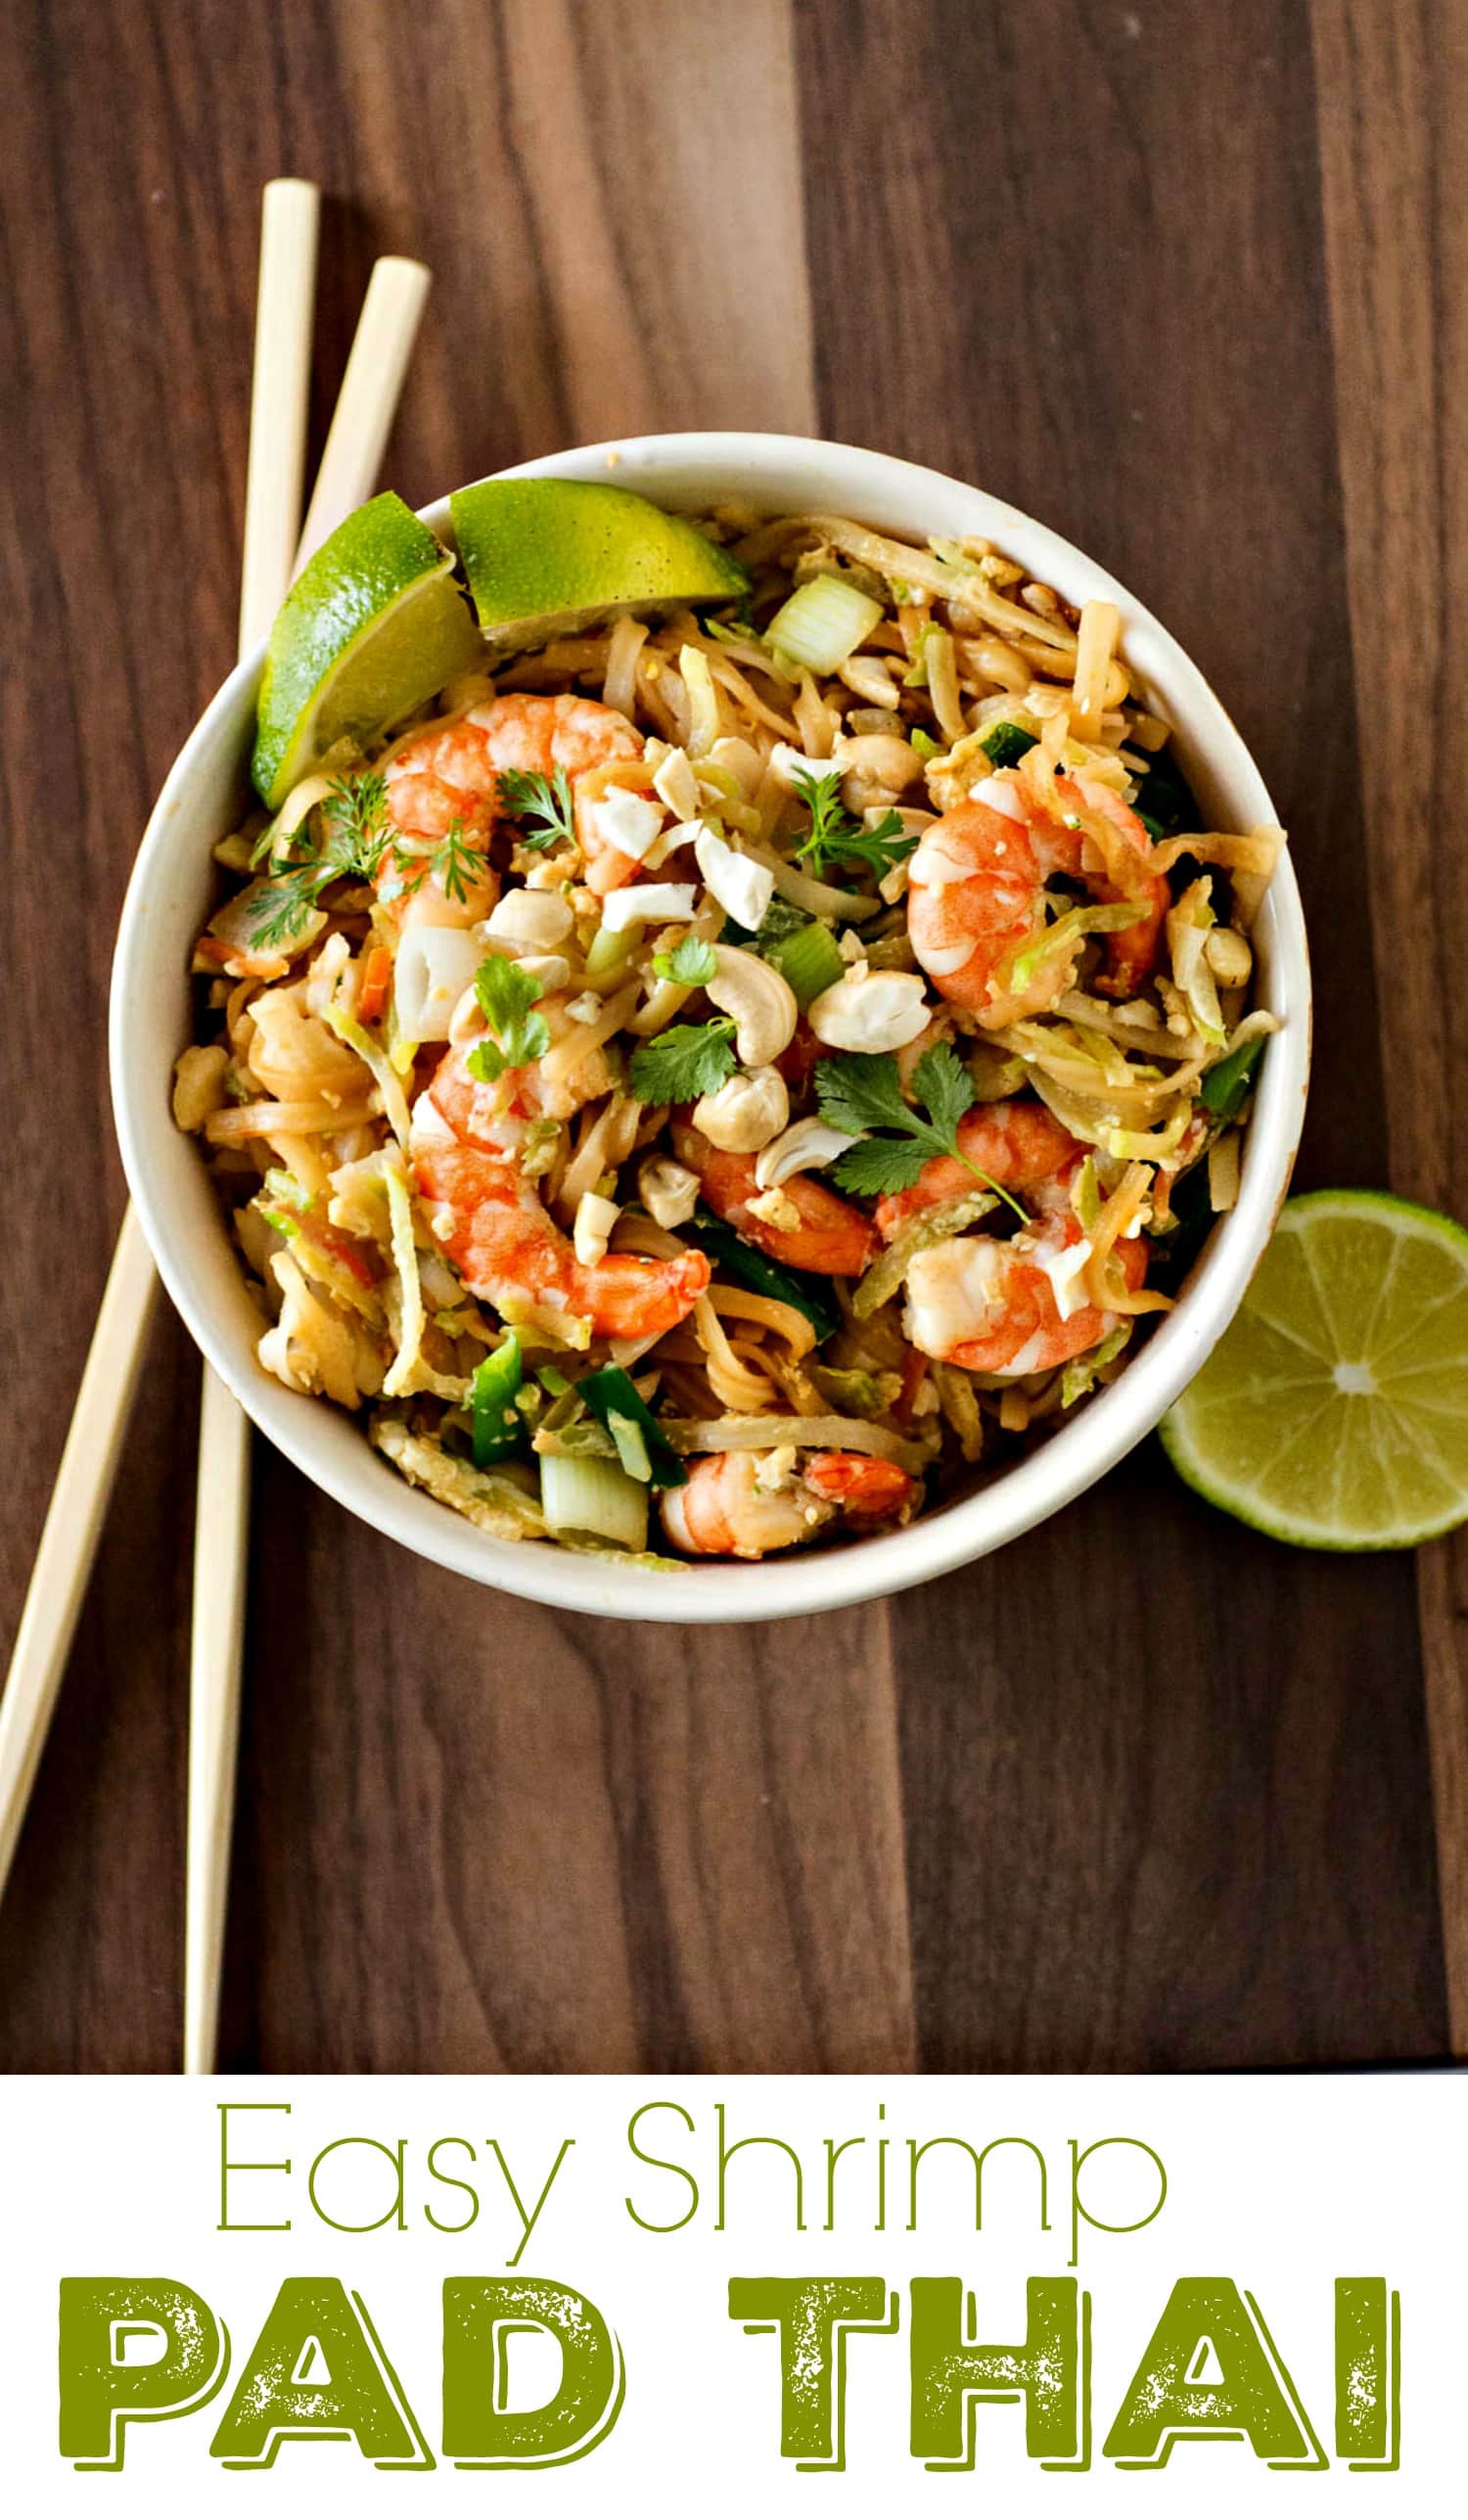 This Easy Shrimp Pad Thai recipe is great for a family weeknight meal and ready in under 30 minutes.